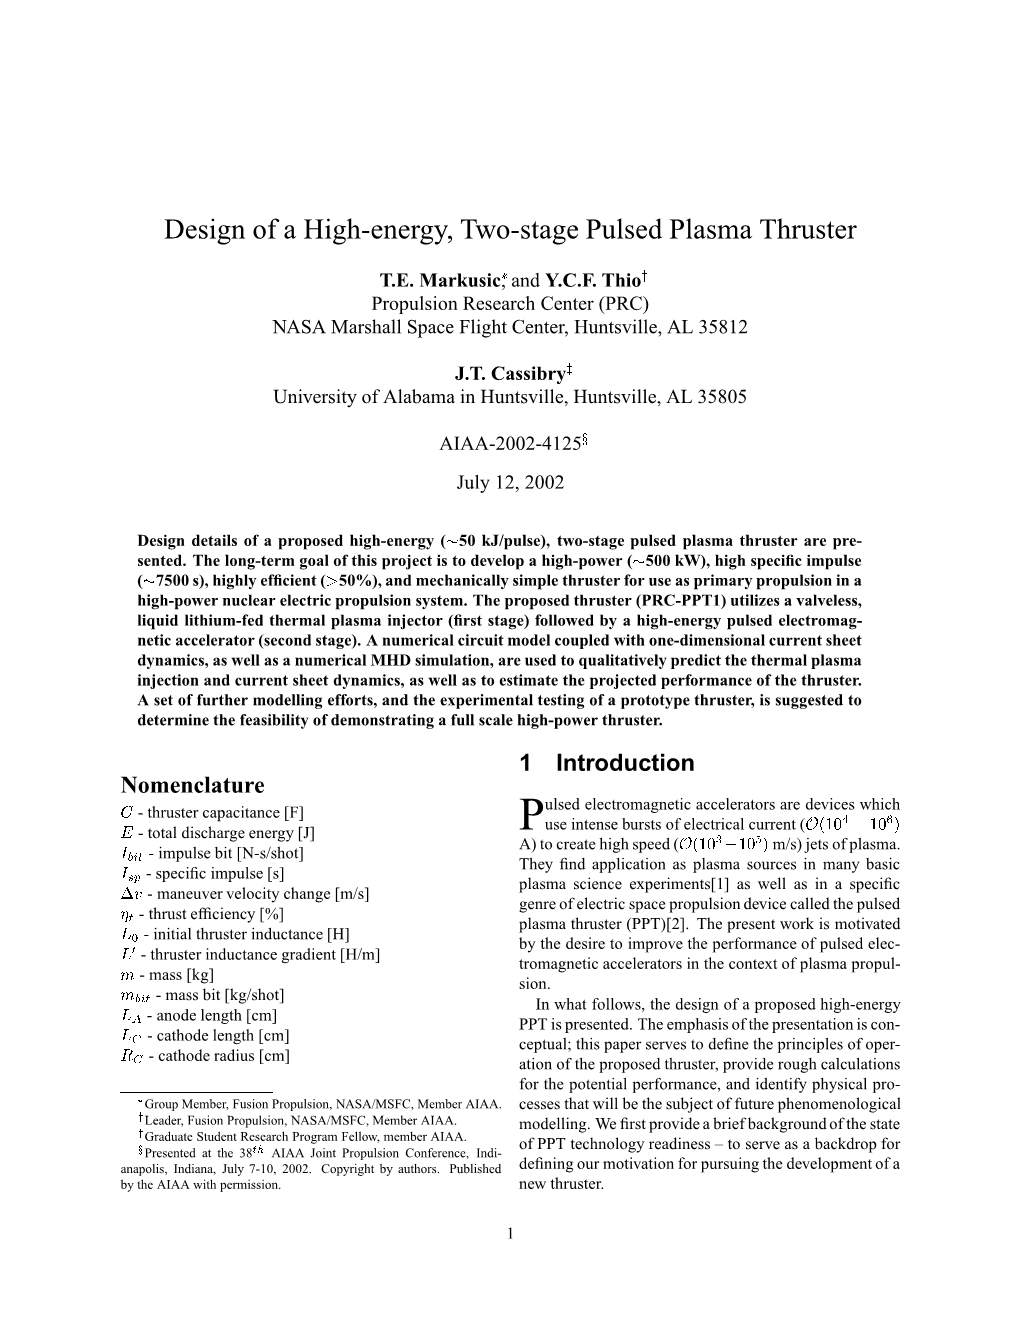 Design of a High-Energy, Two-Stage Pulsed Plasma Thruster ¡ T.E